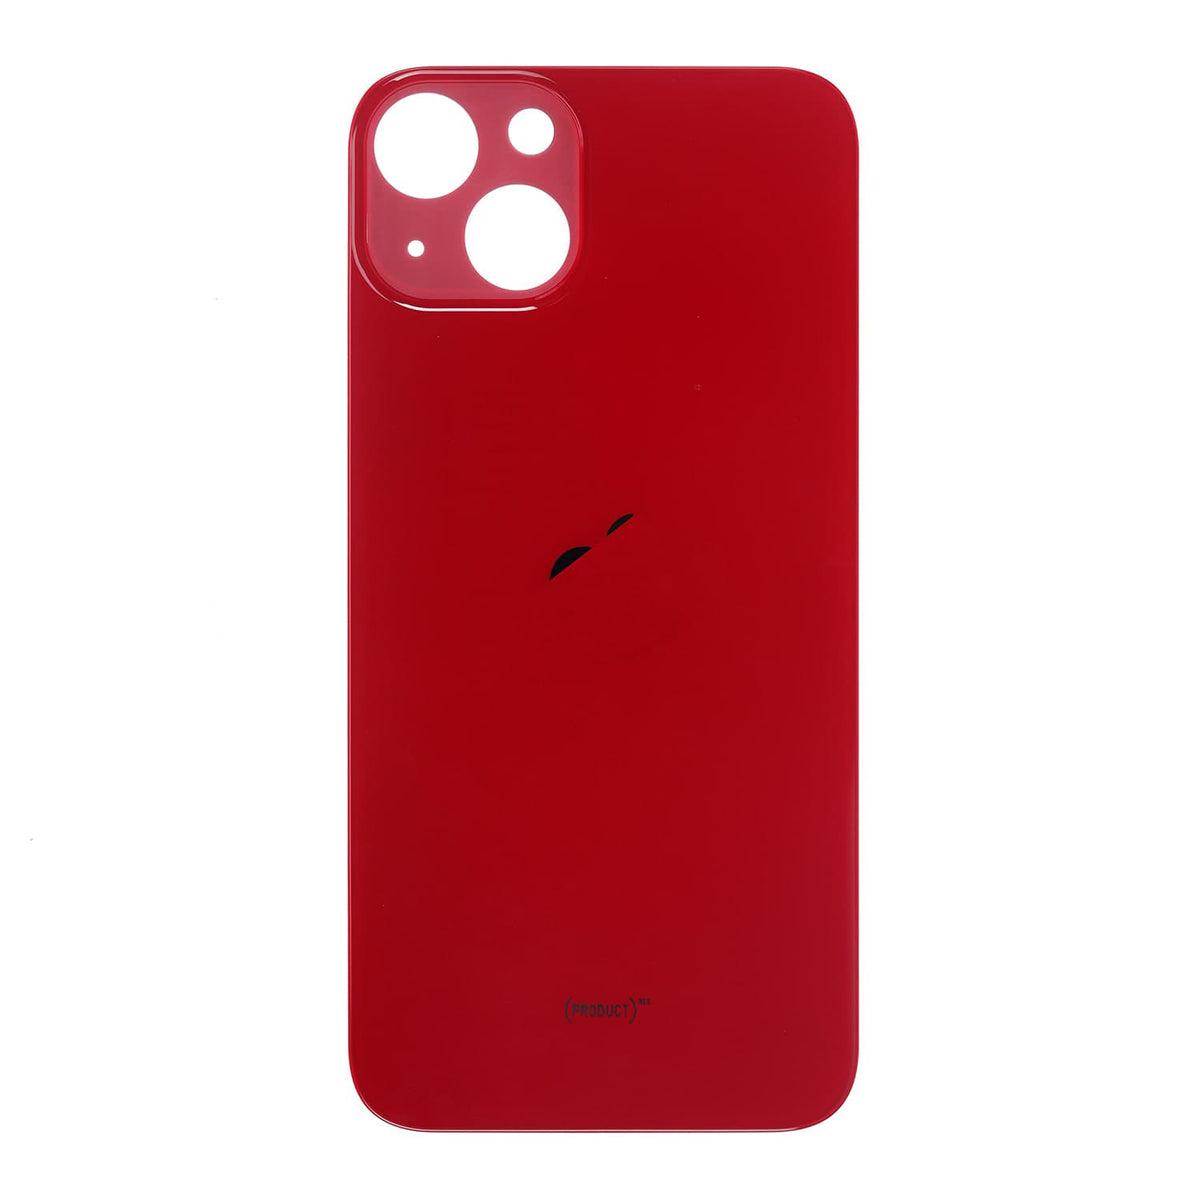 RED BACK COVER GLASS FOR IPHONE 13 MINI